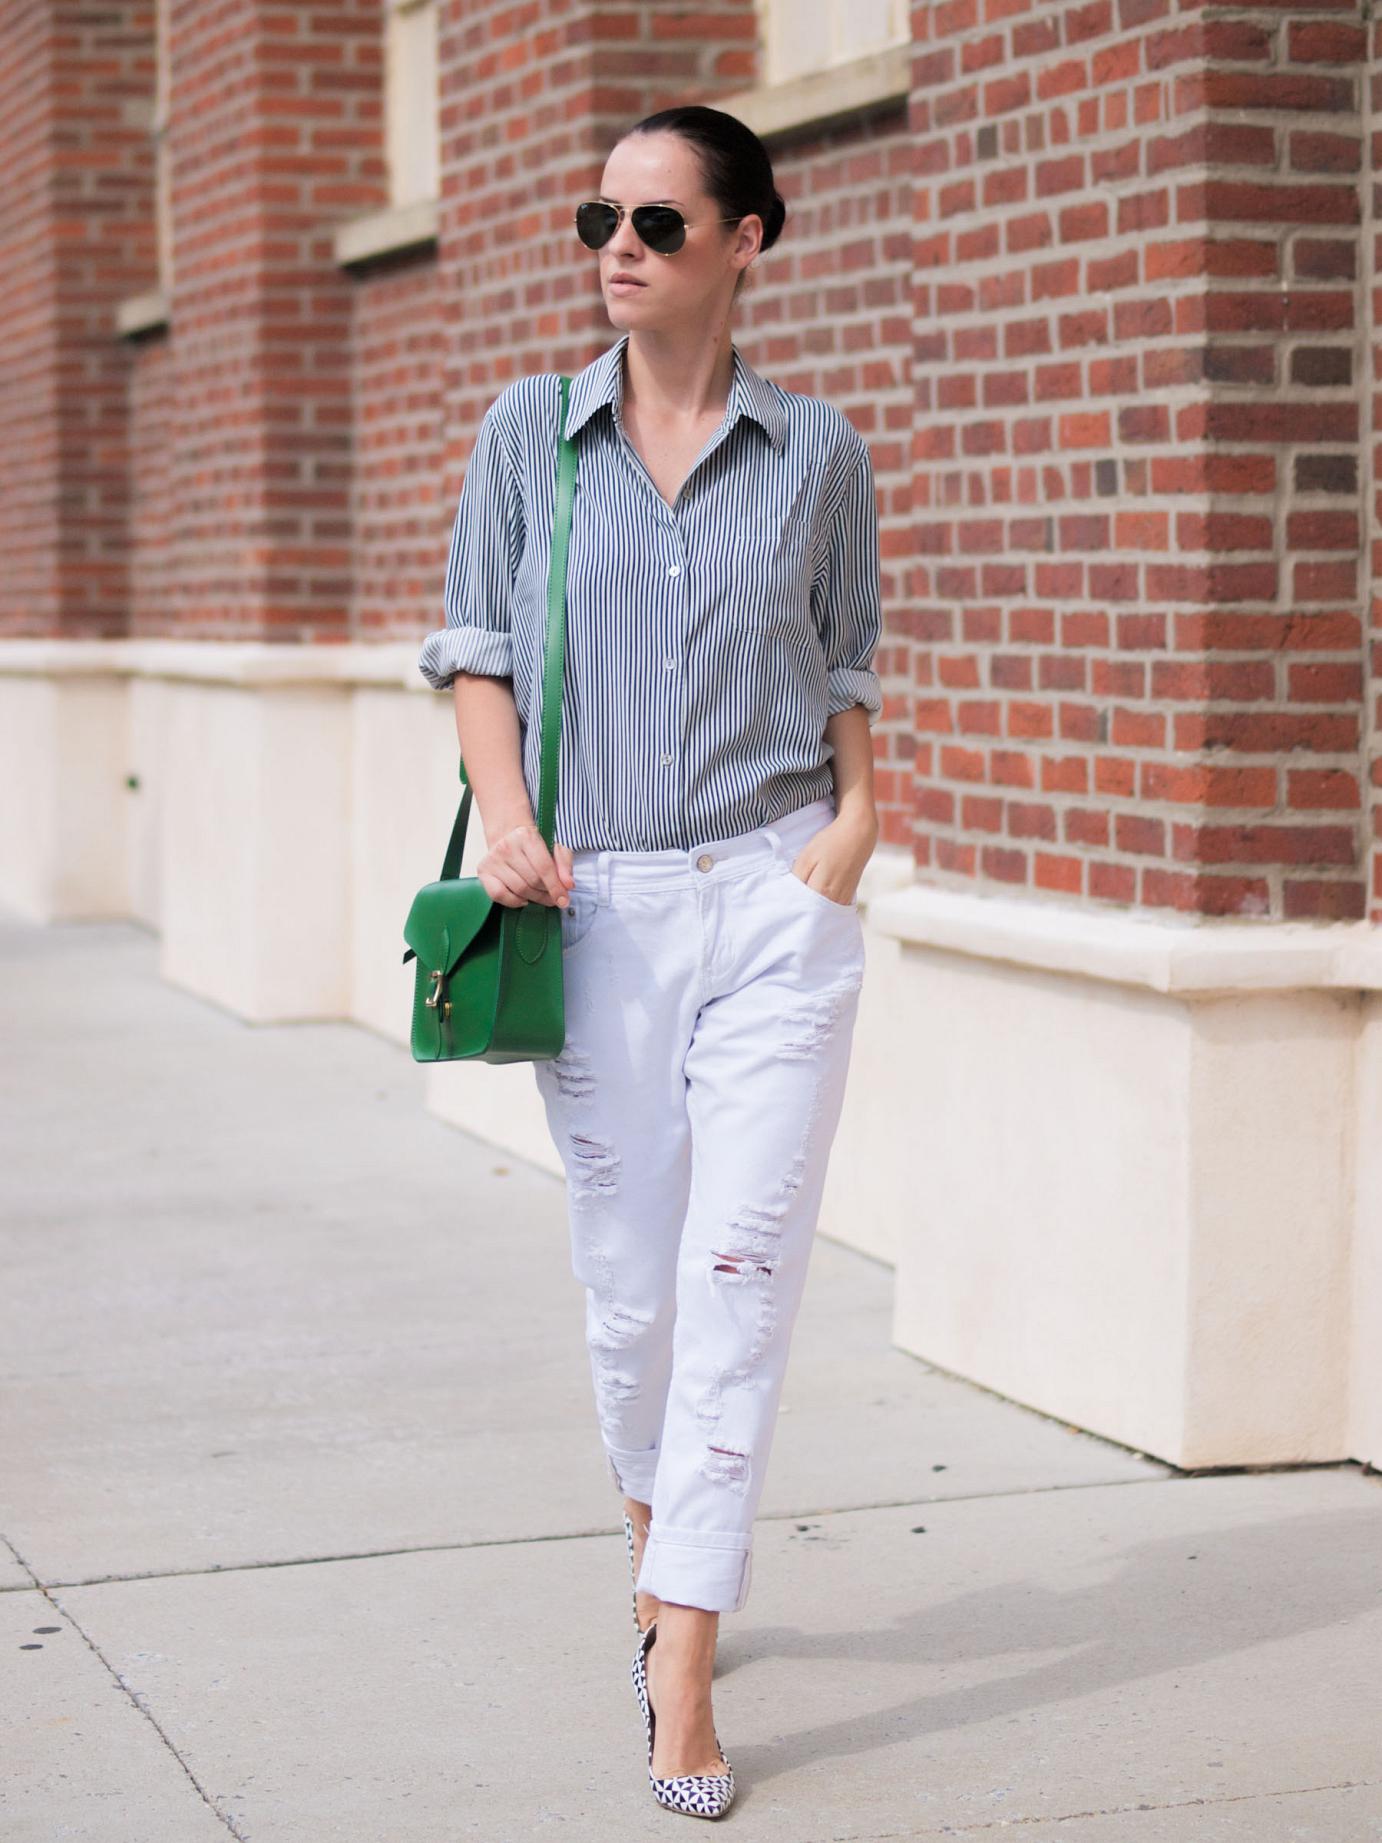 BITTERSWEET COLOURS, angela Roi bag, green bag, boyfriend jeans, white jeans, j.crew shoes, stripes, street style. ray ban, lord and taylor, 